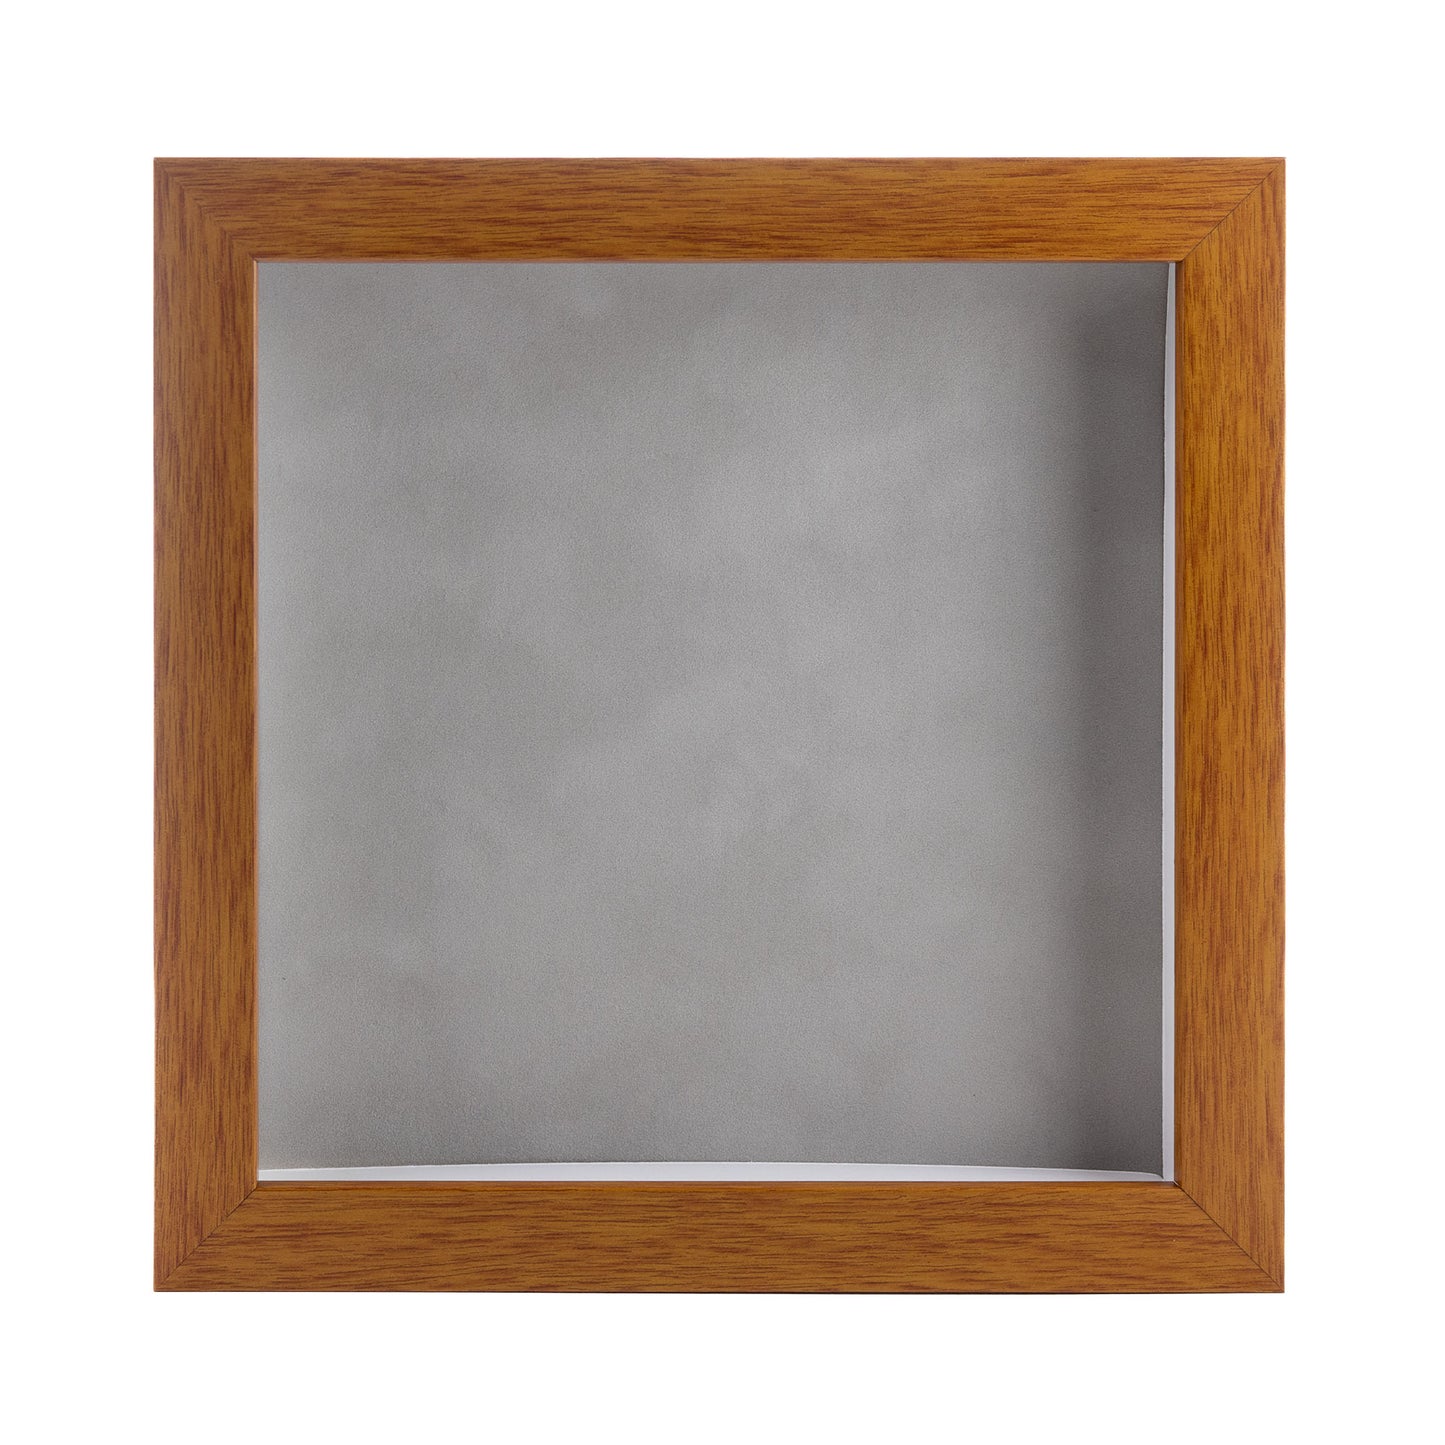 Honey Pecan Shadow Box Frame With Light Grey Acid-Free Suede Backing